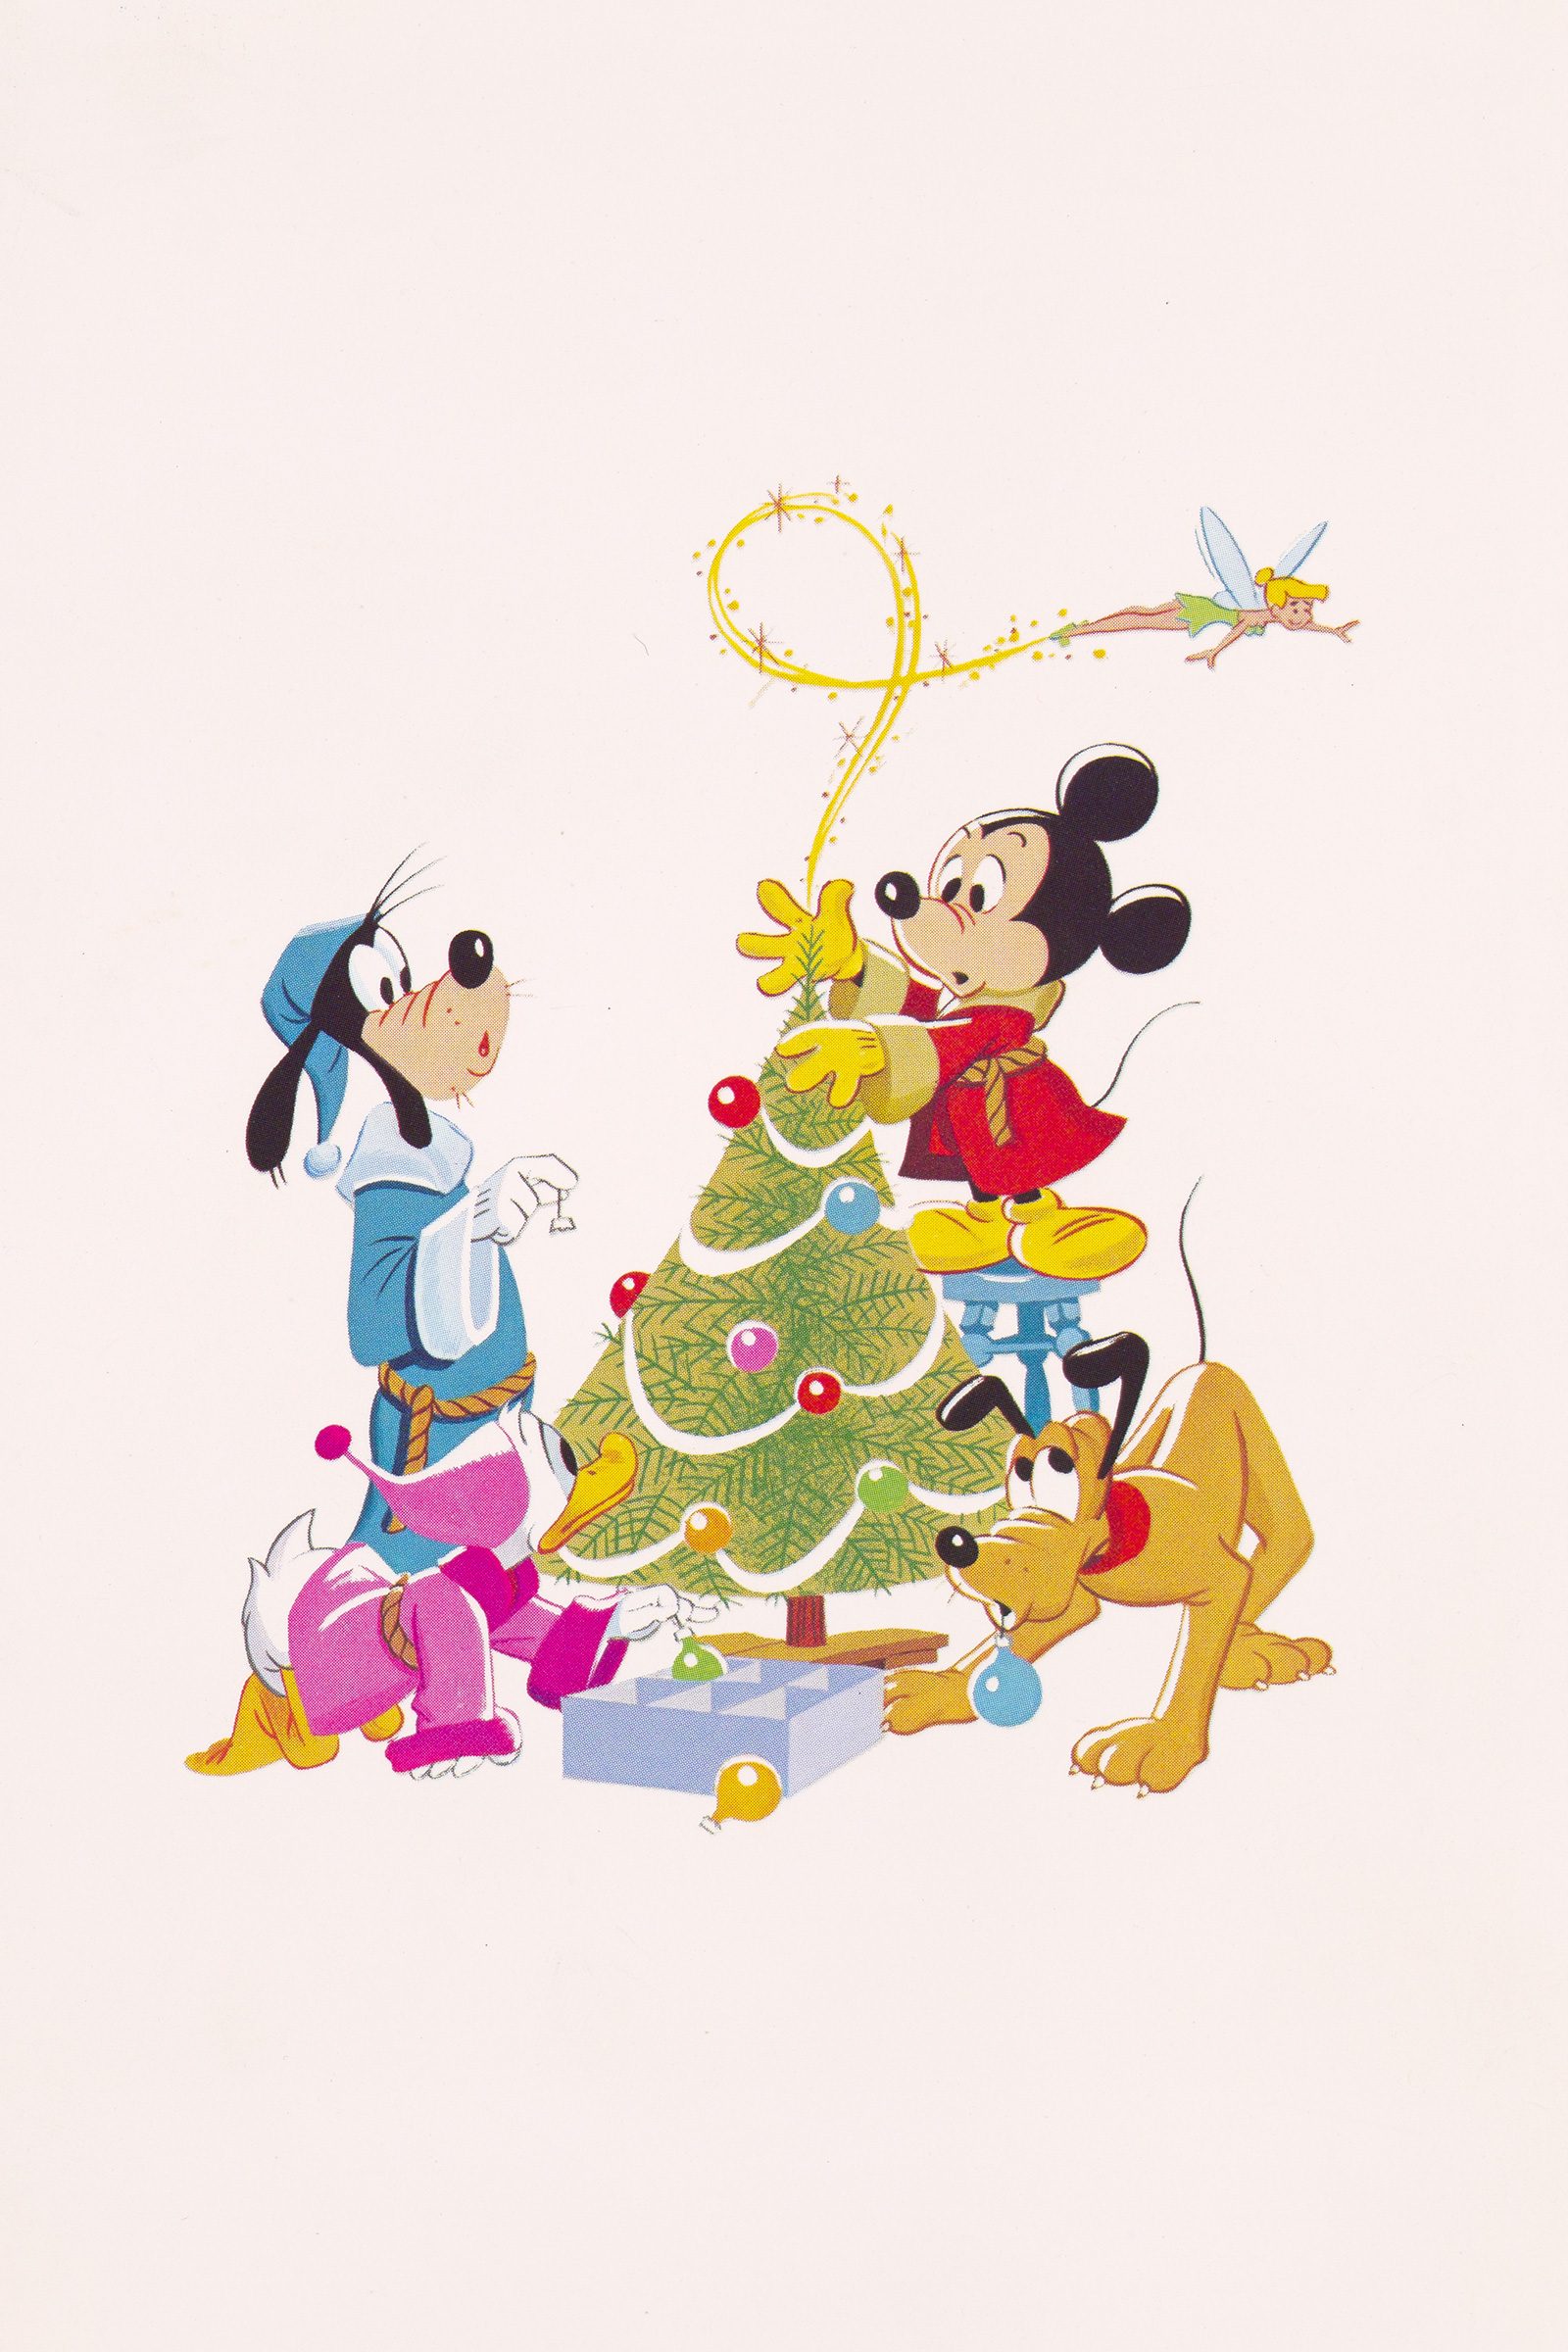 Vintage Disney Christmas Cards from Every Decade. Reader's Digest